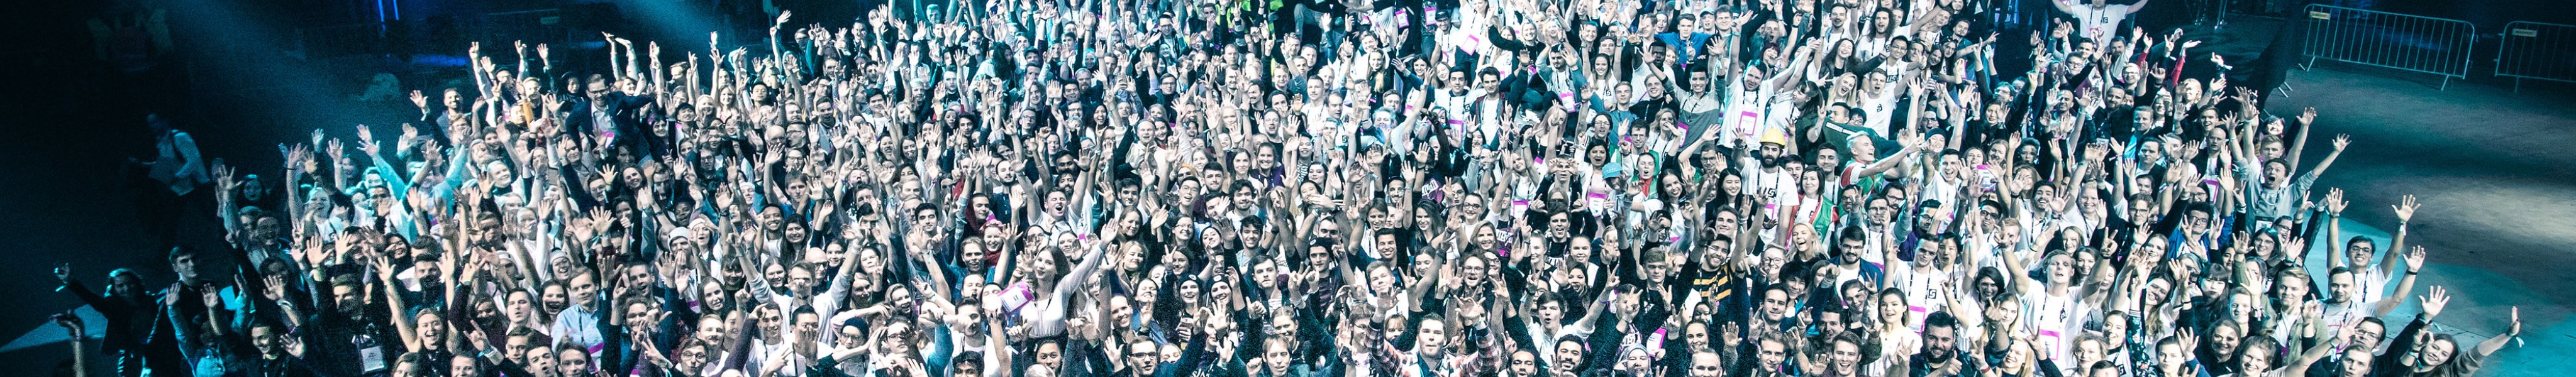 Image of a group that organised Slush startup event who are gathered together and celebrating towards the camera